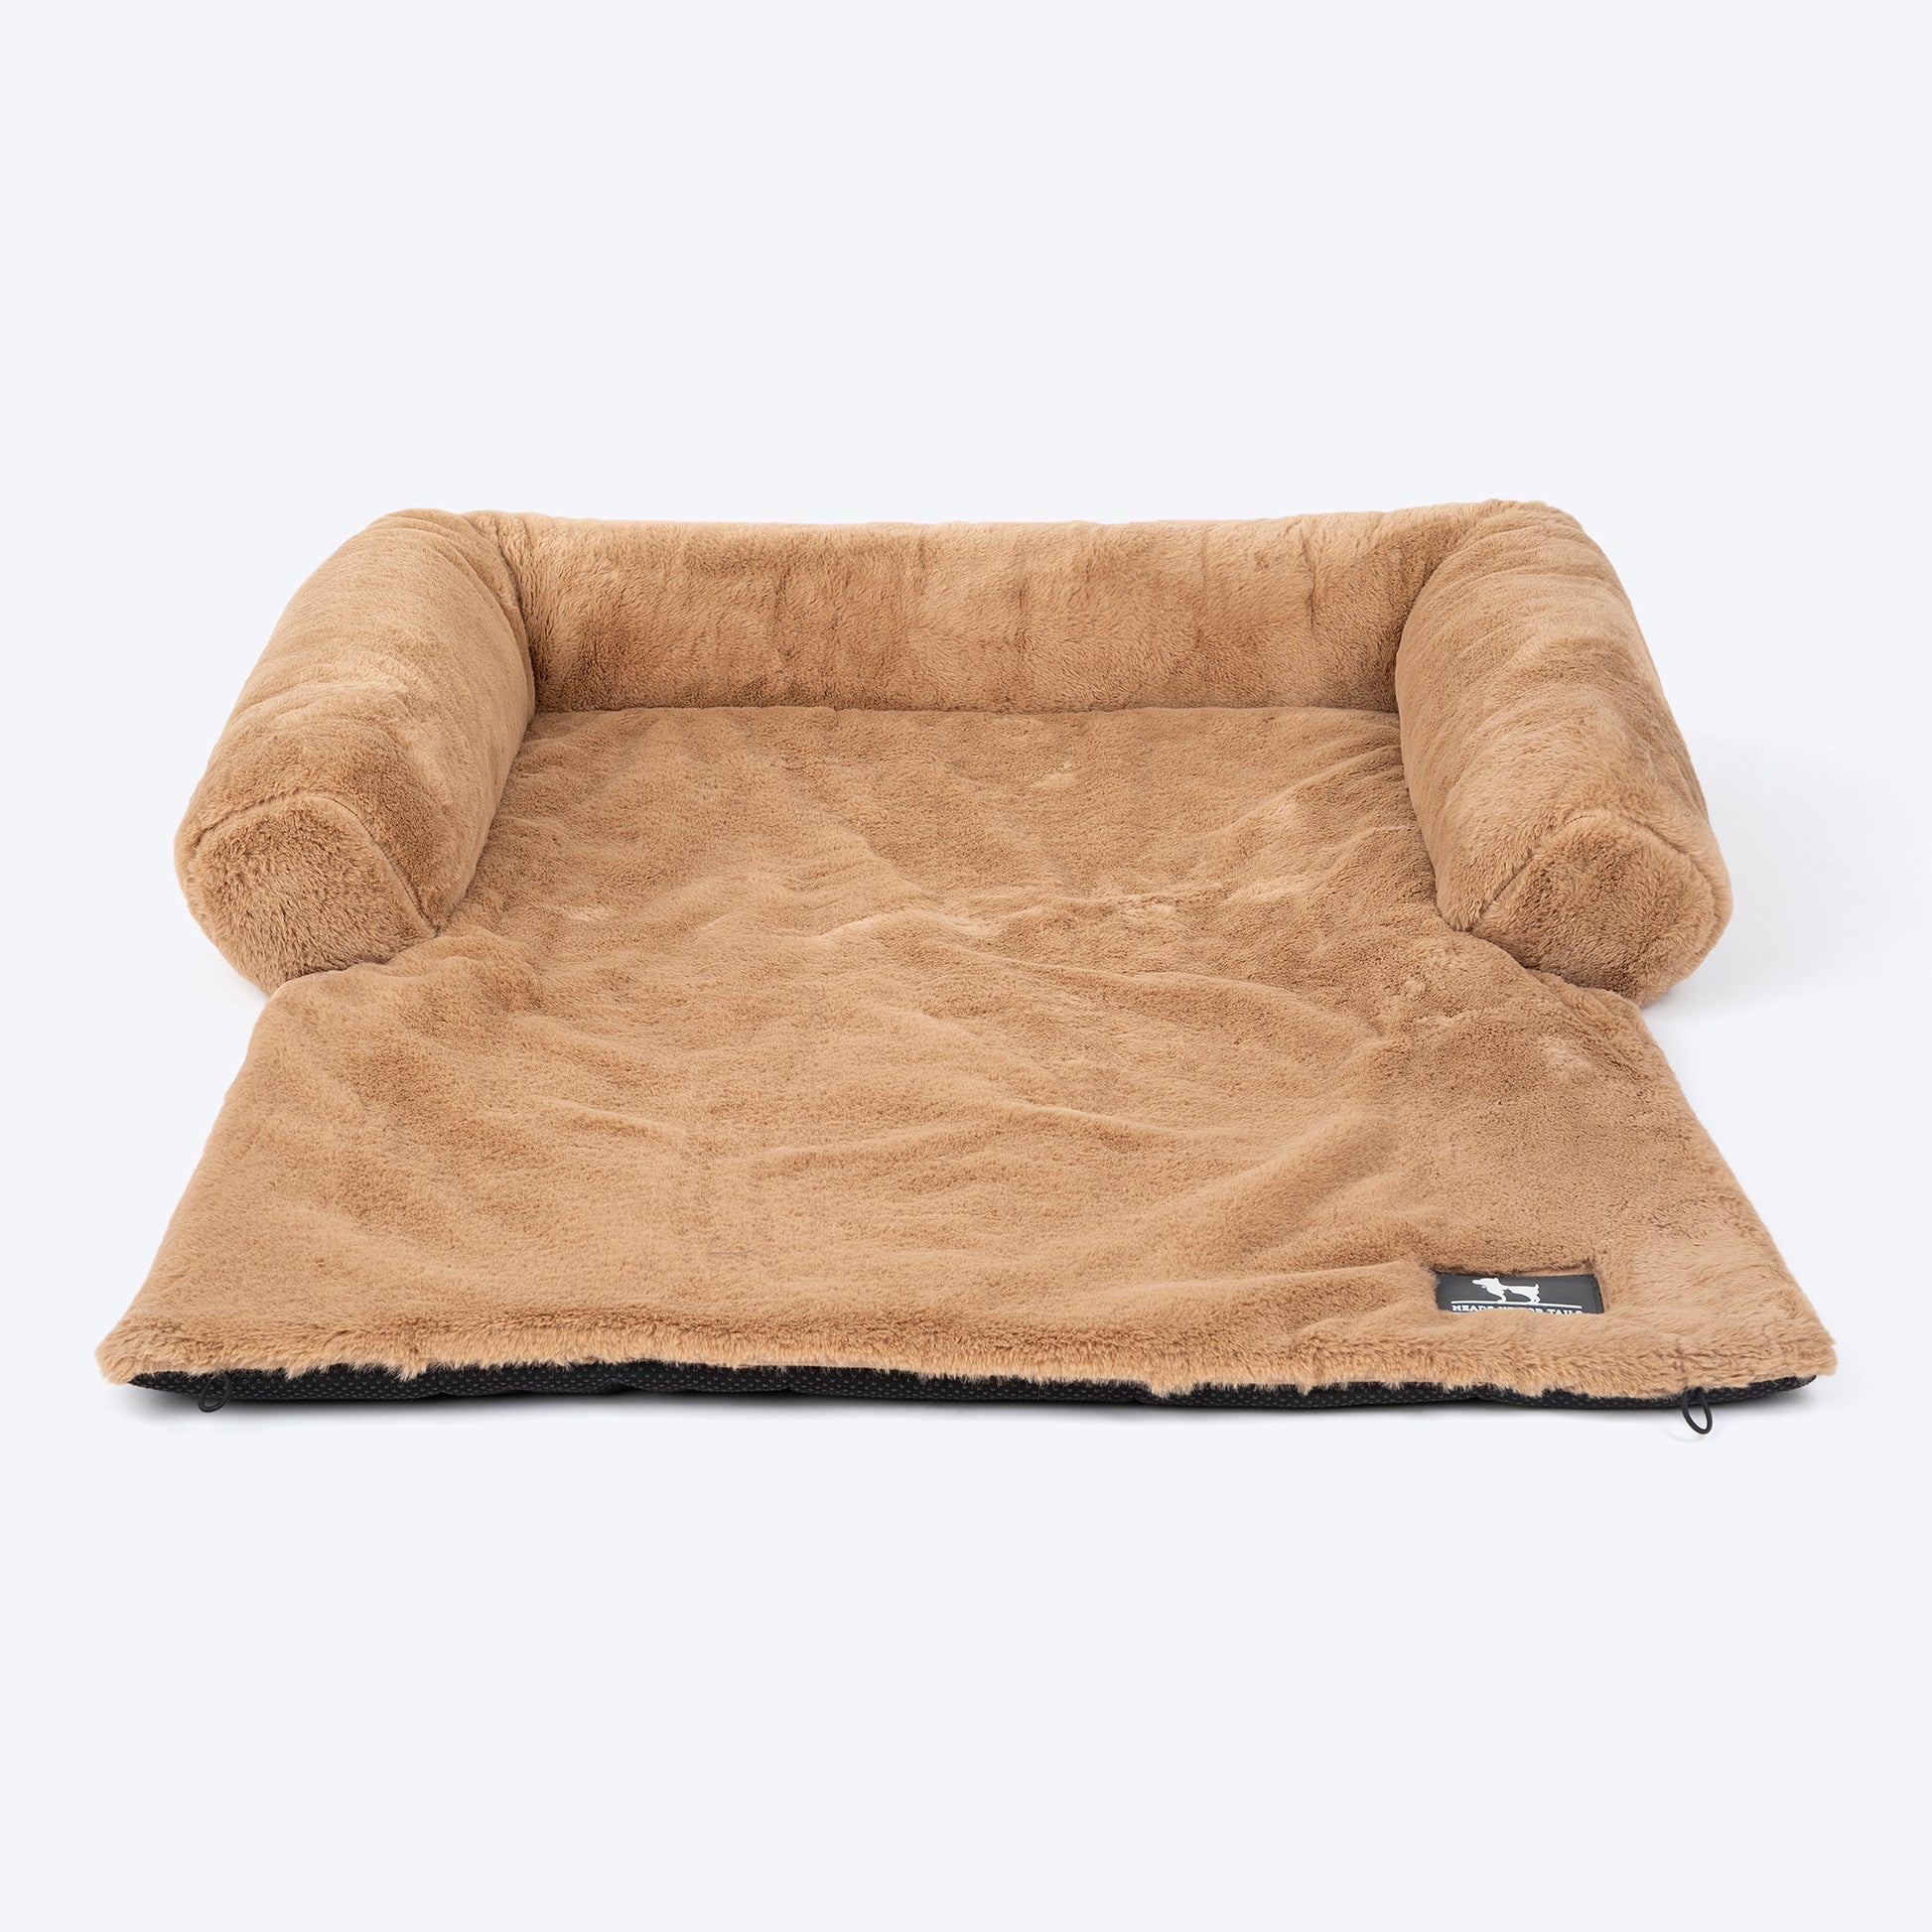 HUFT Fluffy Dreams Sofa Protector For Dogs - Brown (Made to Order) - Heads Up For Tails